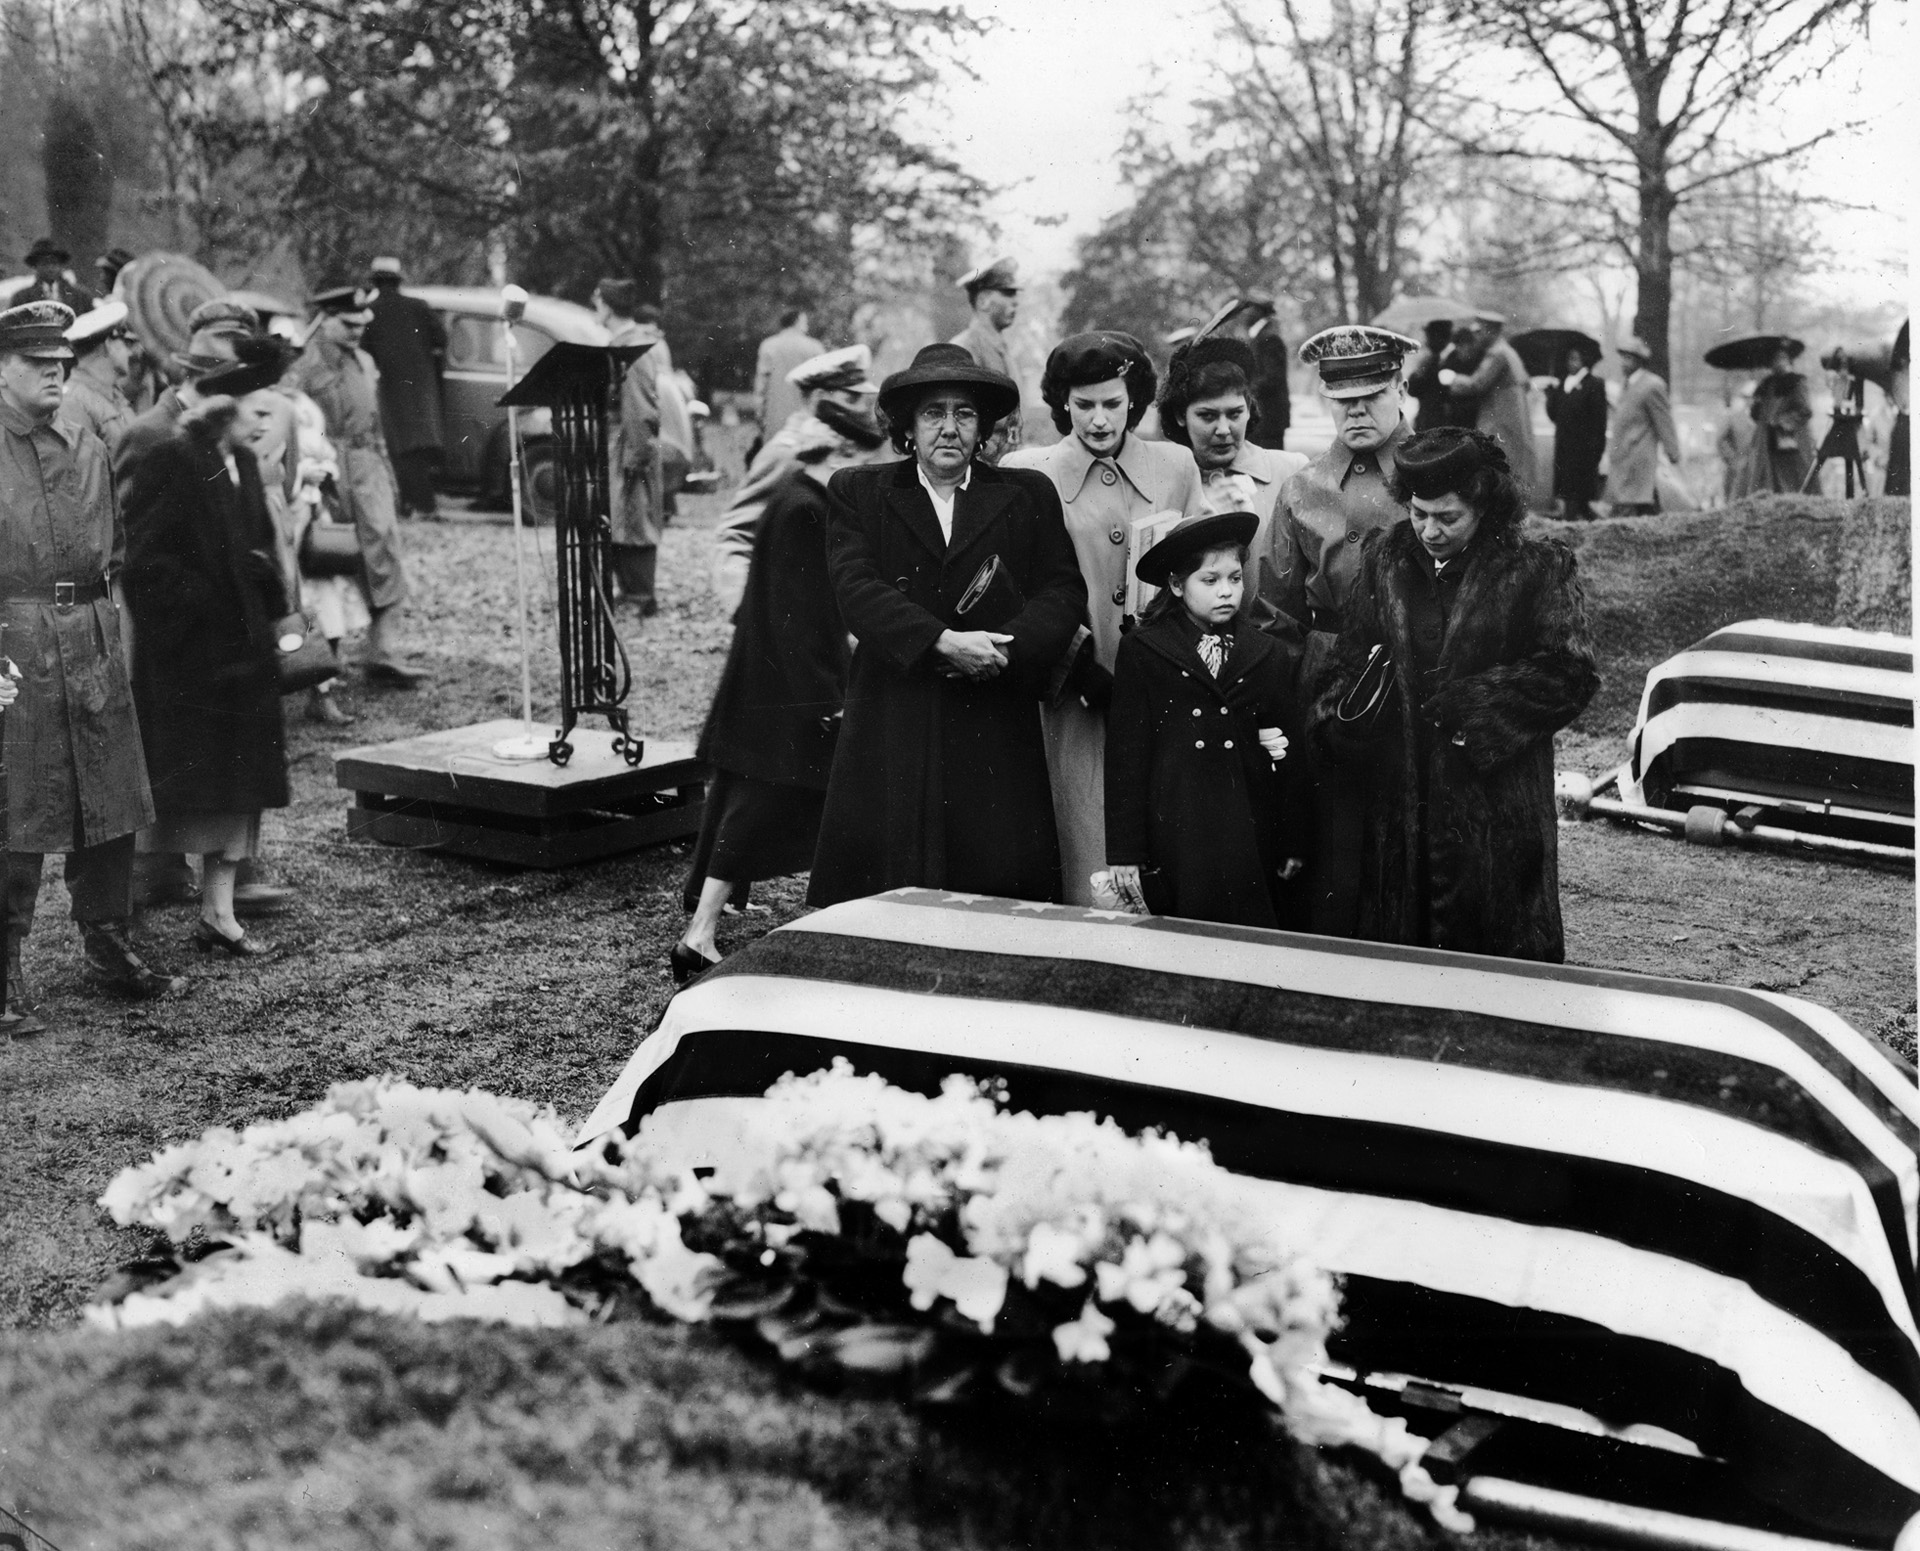 During funeral services for Pfc. Felix Longoria on February 16, 1949, family members pause beside the flag-draped casket. Longoria was buried with full military honors at Arlington National Cemetery after a funeral home in his hometown of Three Rivers, Texas, refused to provide services to the Mexican American family.